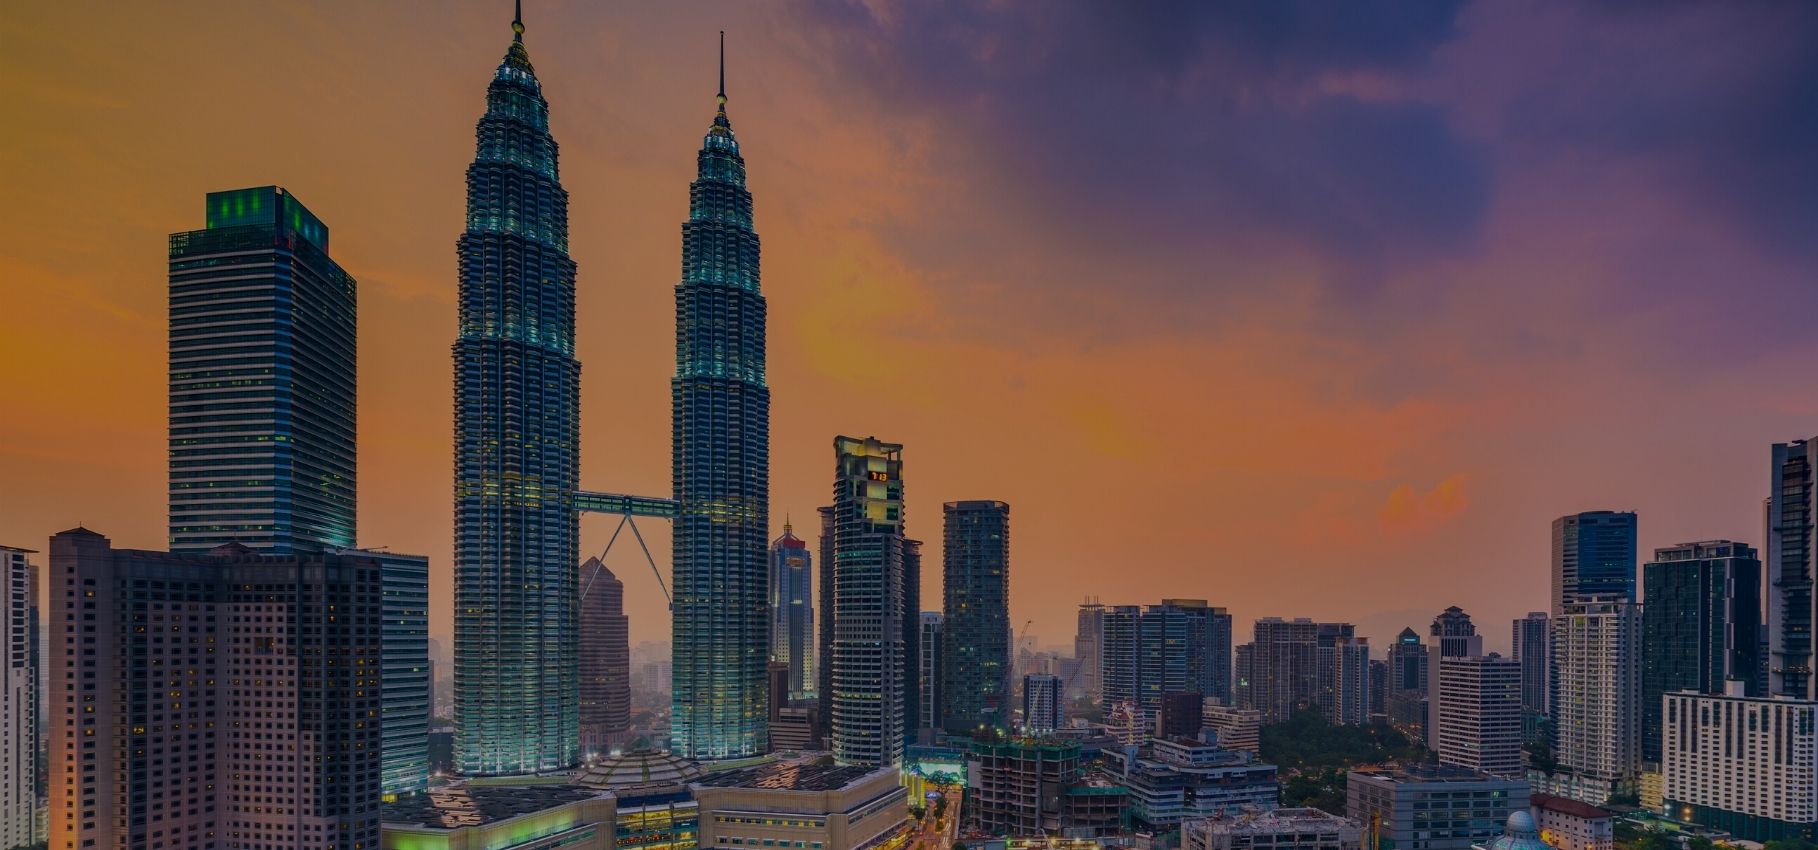 Places to visit in Kuala Lumpur